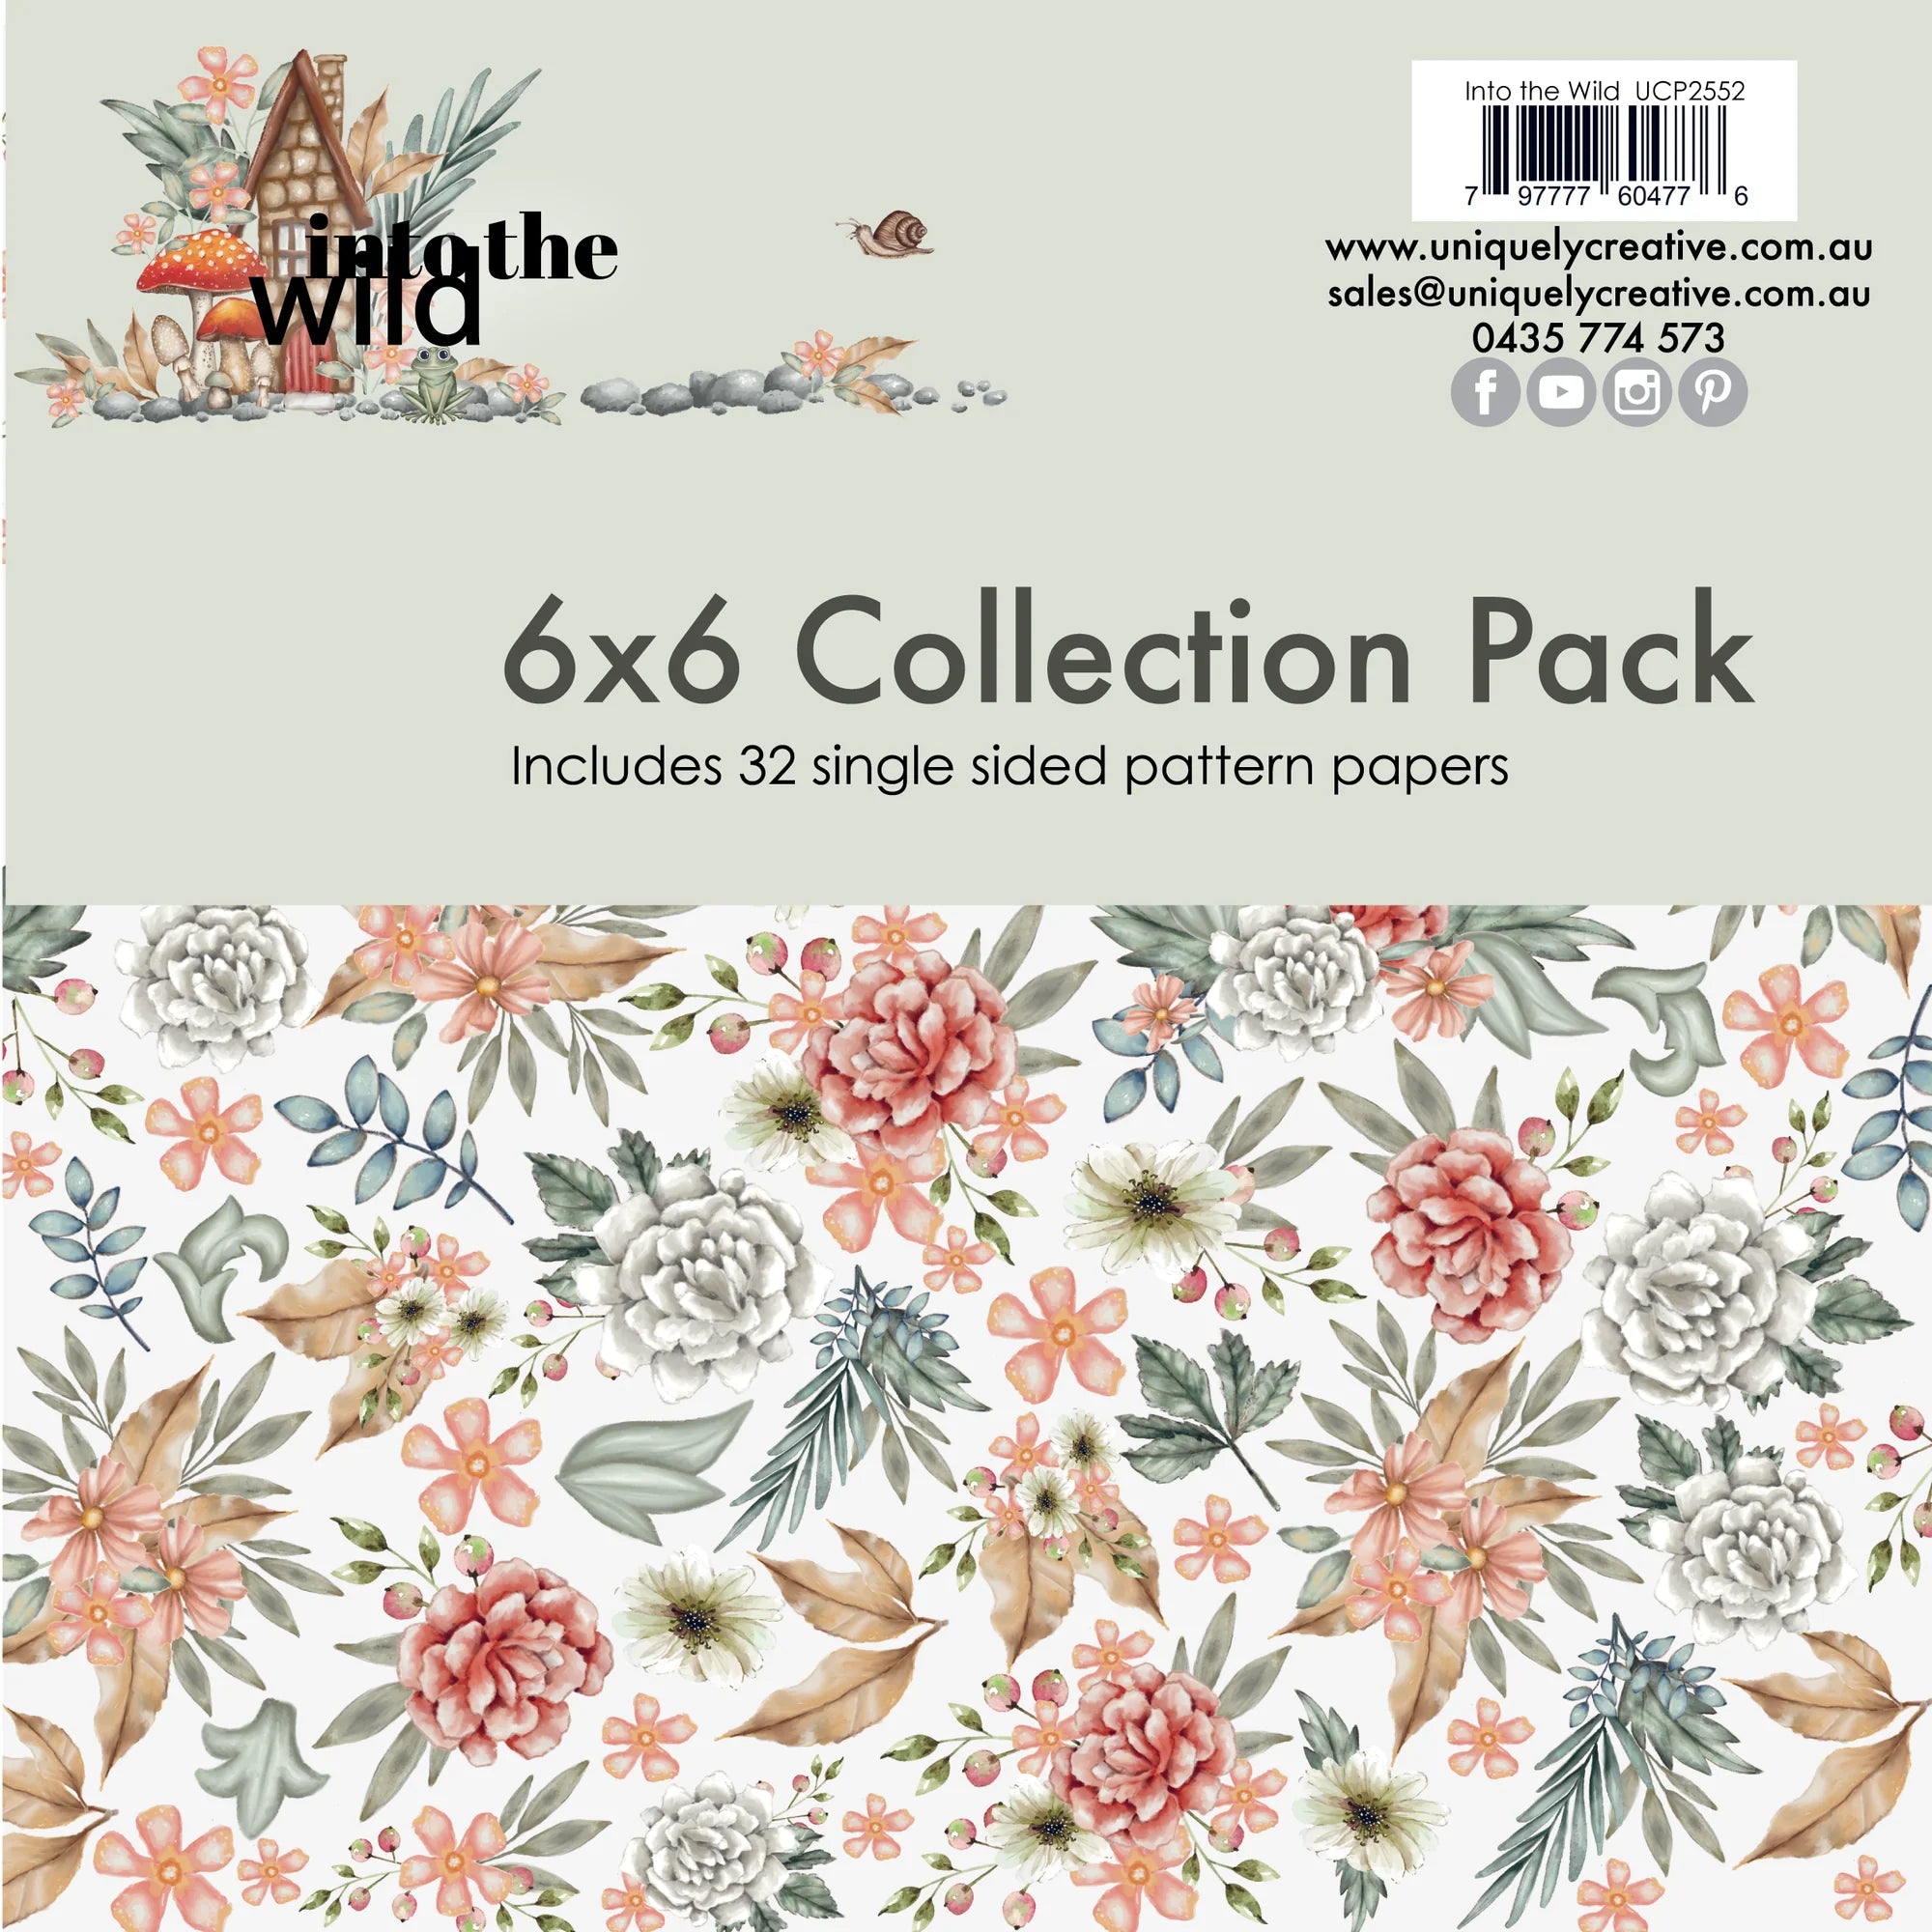 Uniquely Creative - 6x6 Collection Pack - Into the Wild